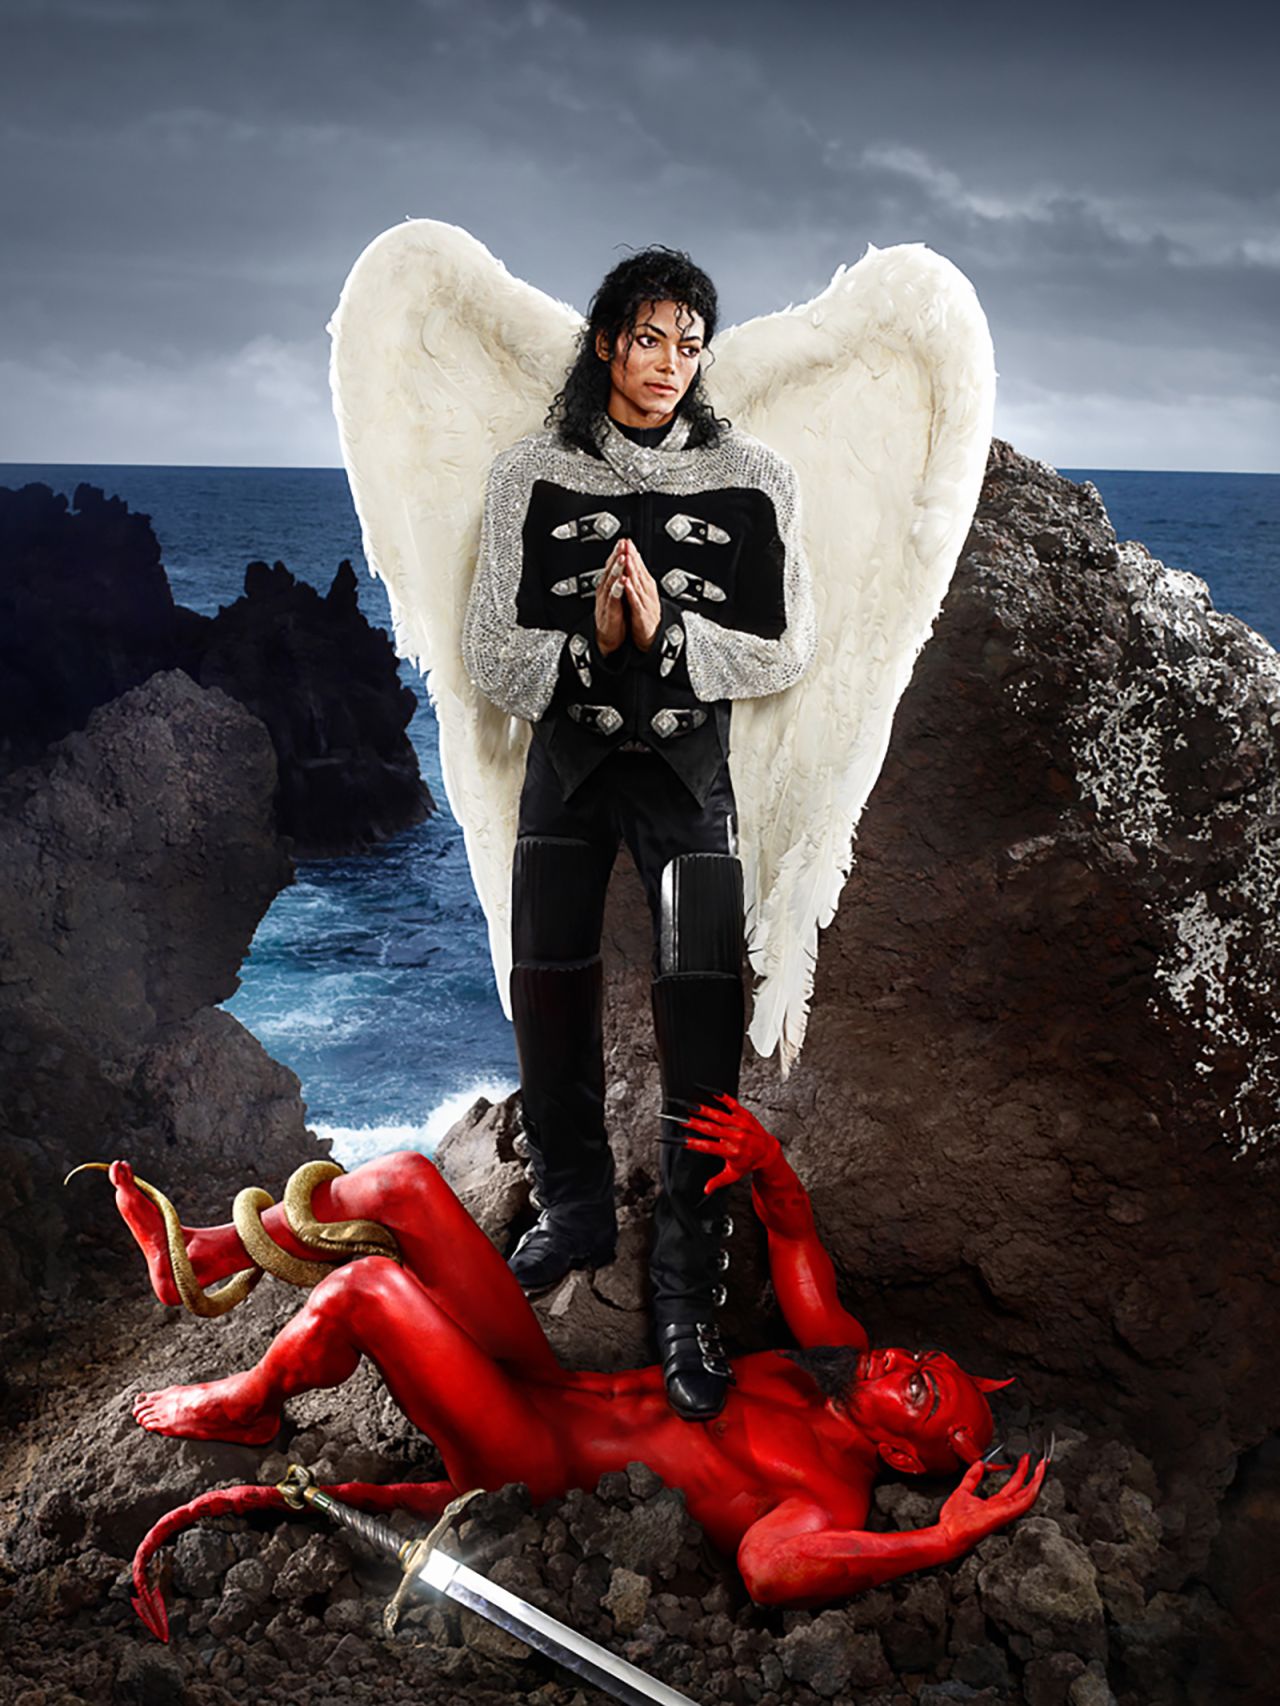 "Archangel Michael; And no message could have been any clearer" (2009, Hawaii)